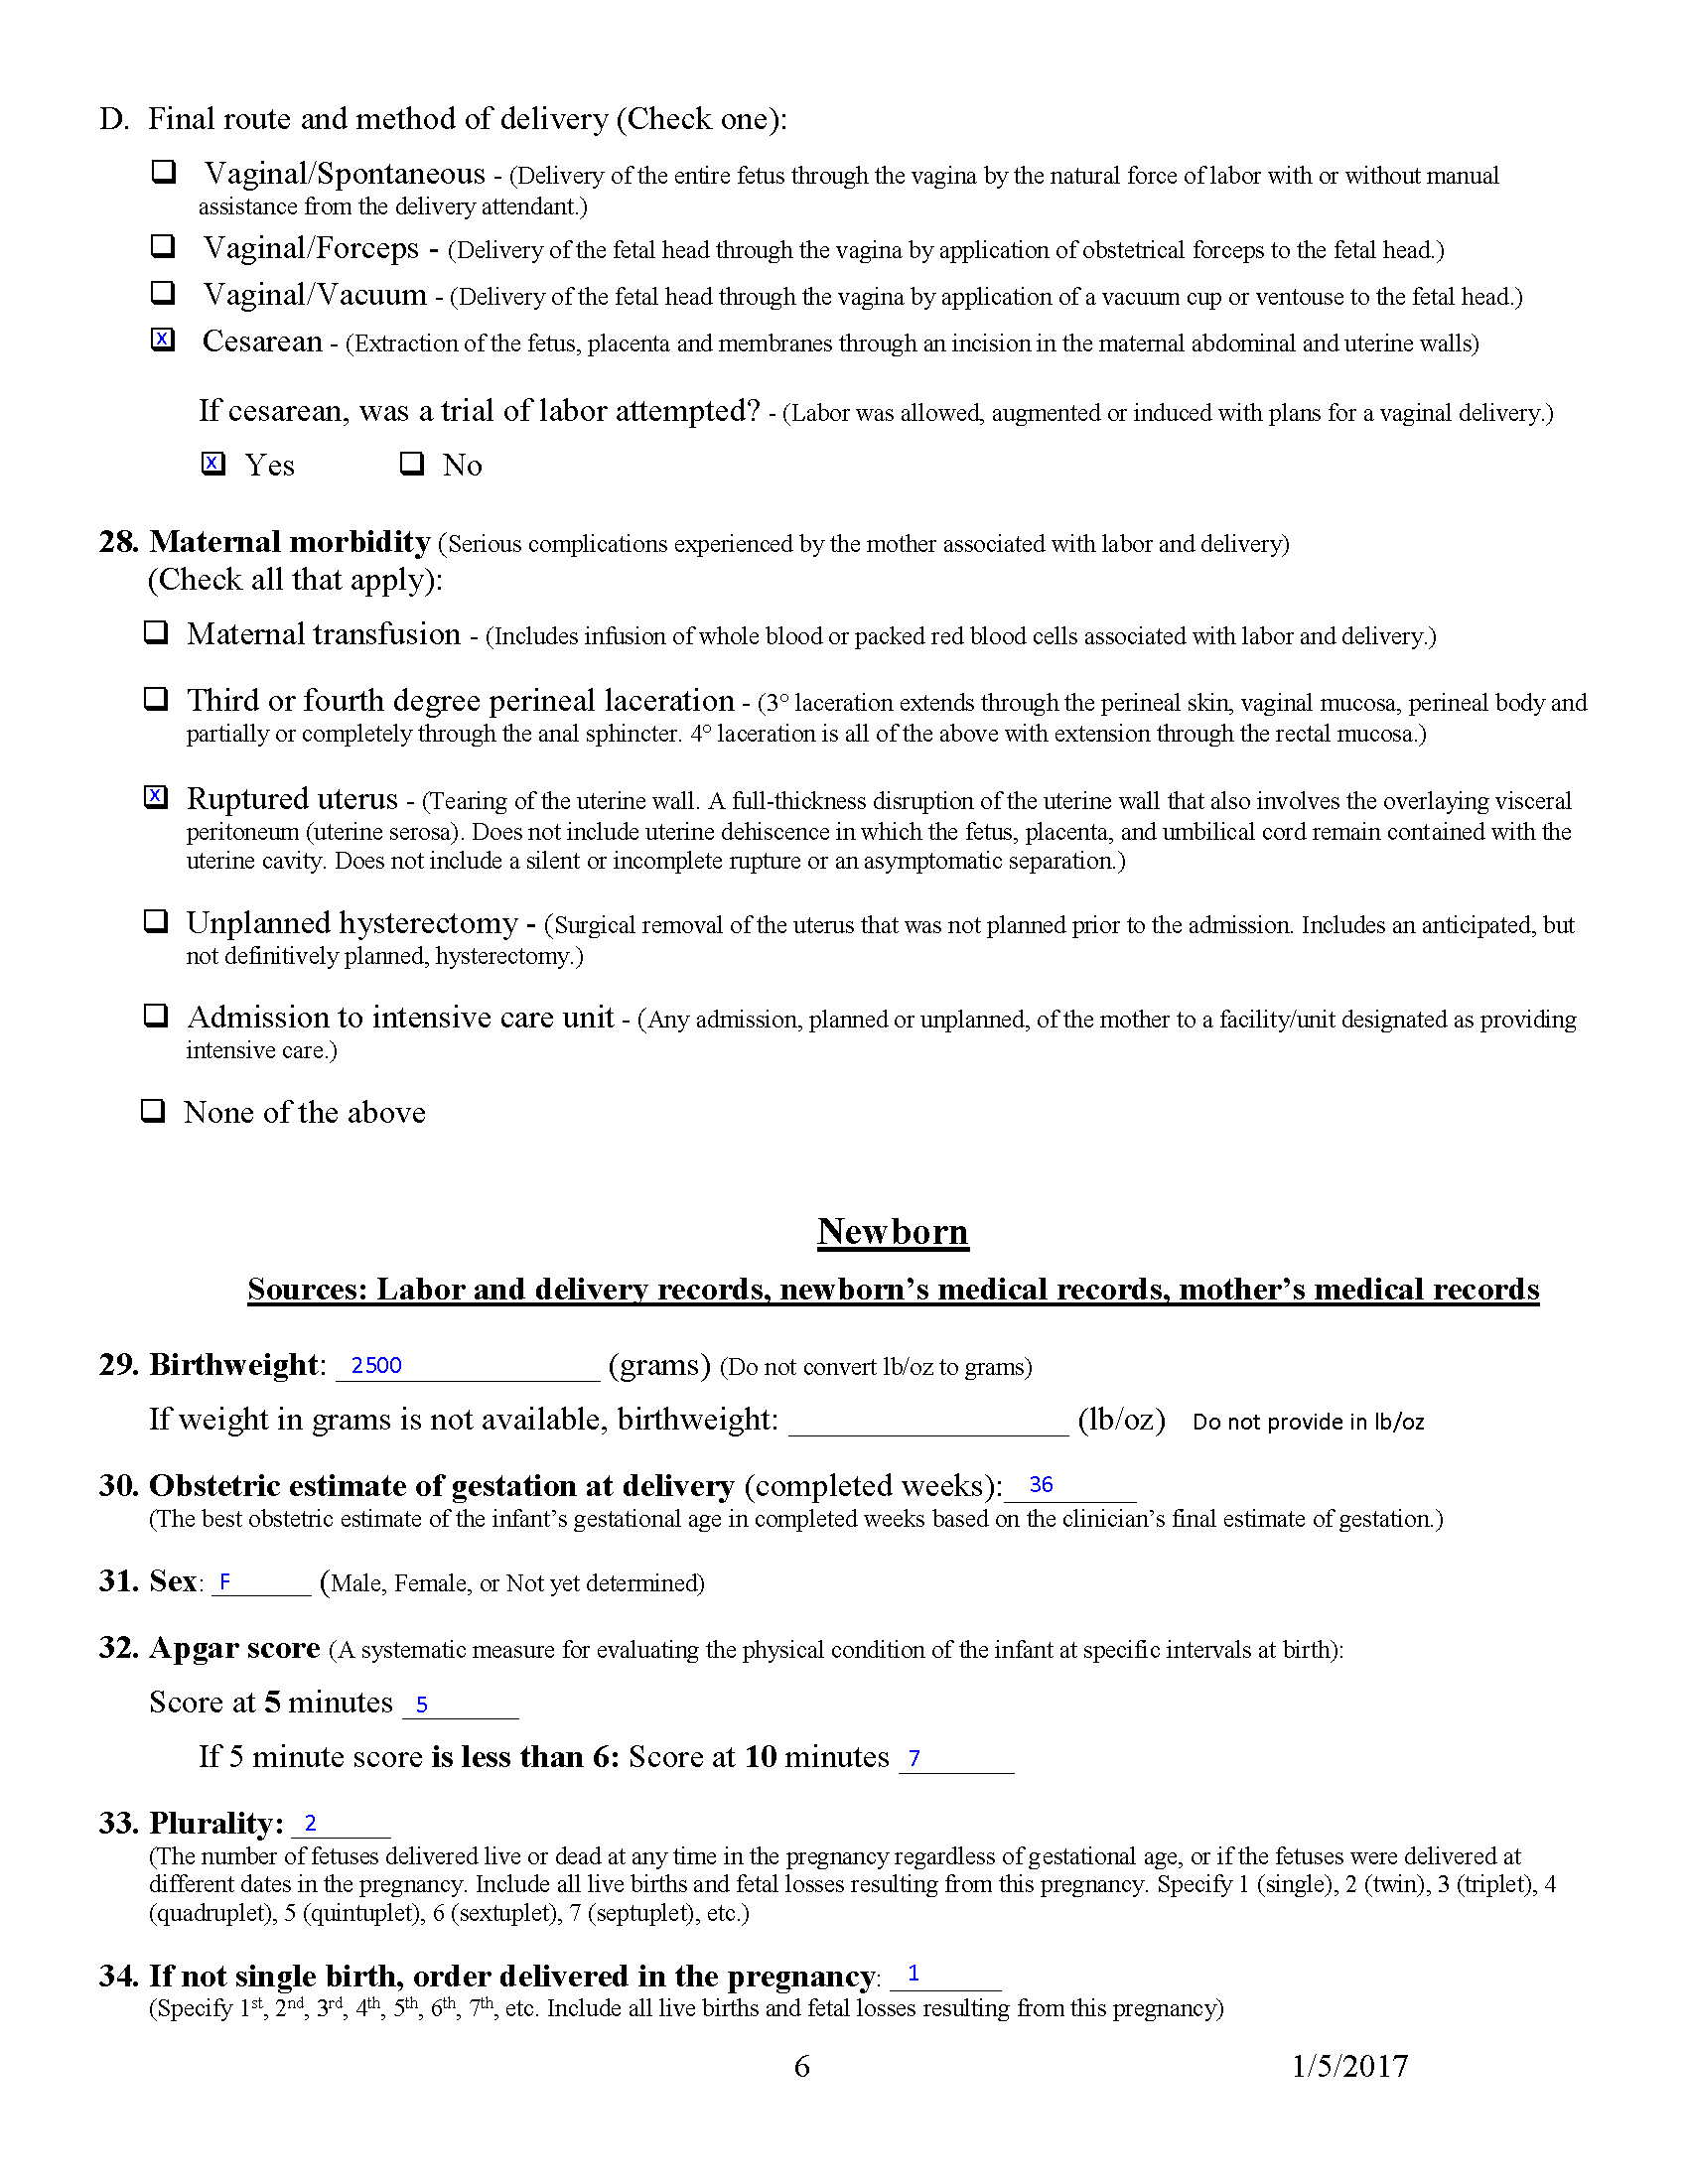 Example Facility Worksheet for Live Birth Certificate for Baby G Quinn - p6